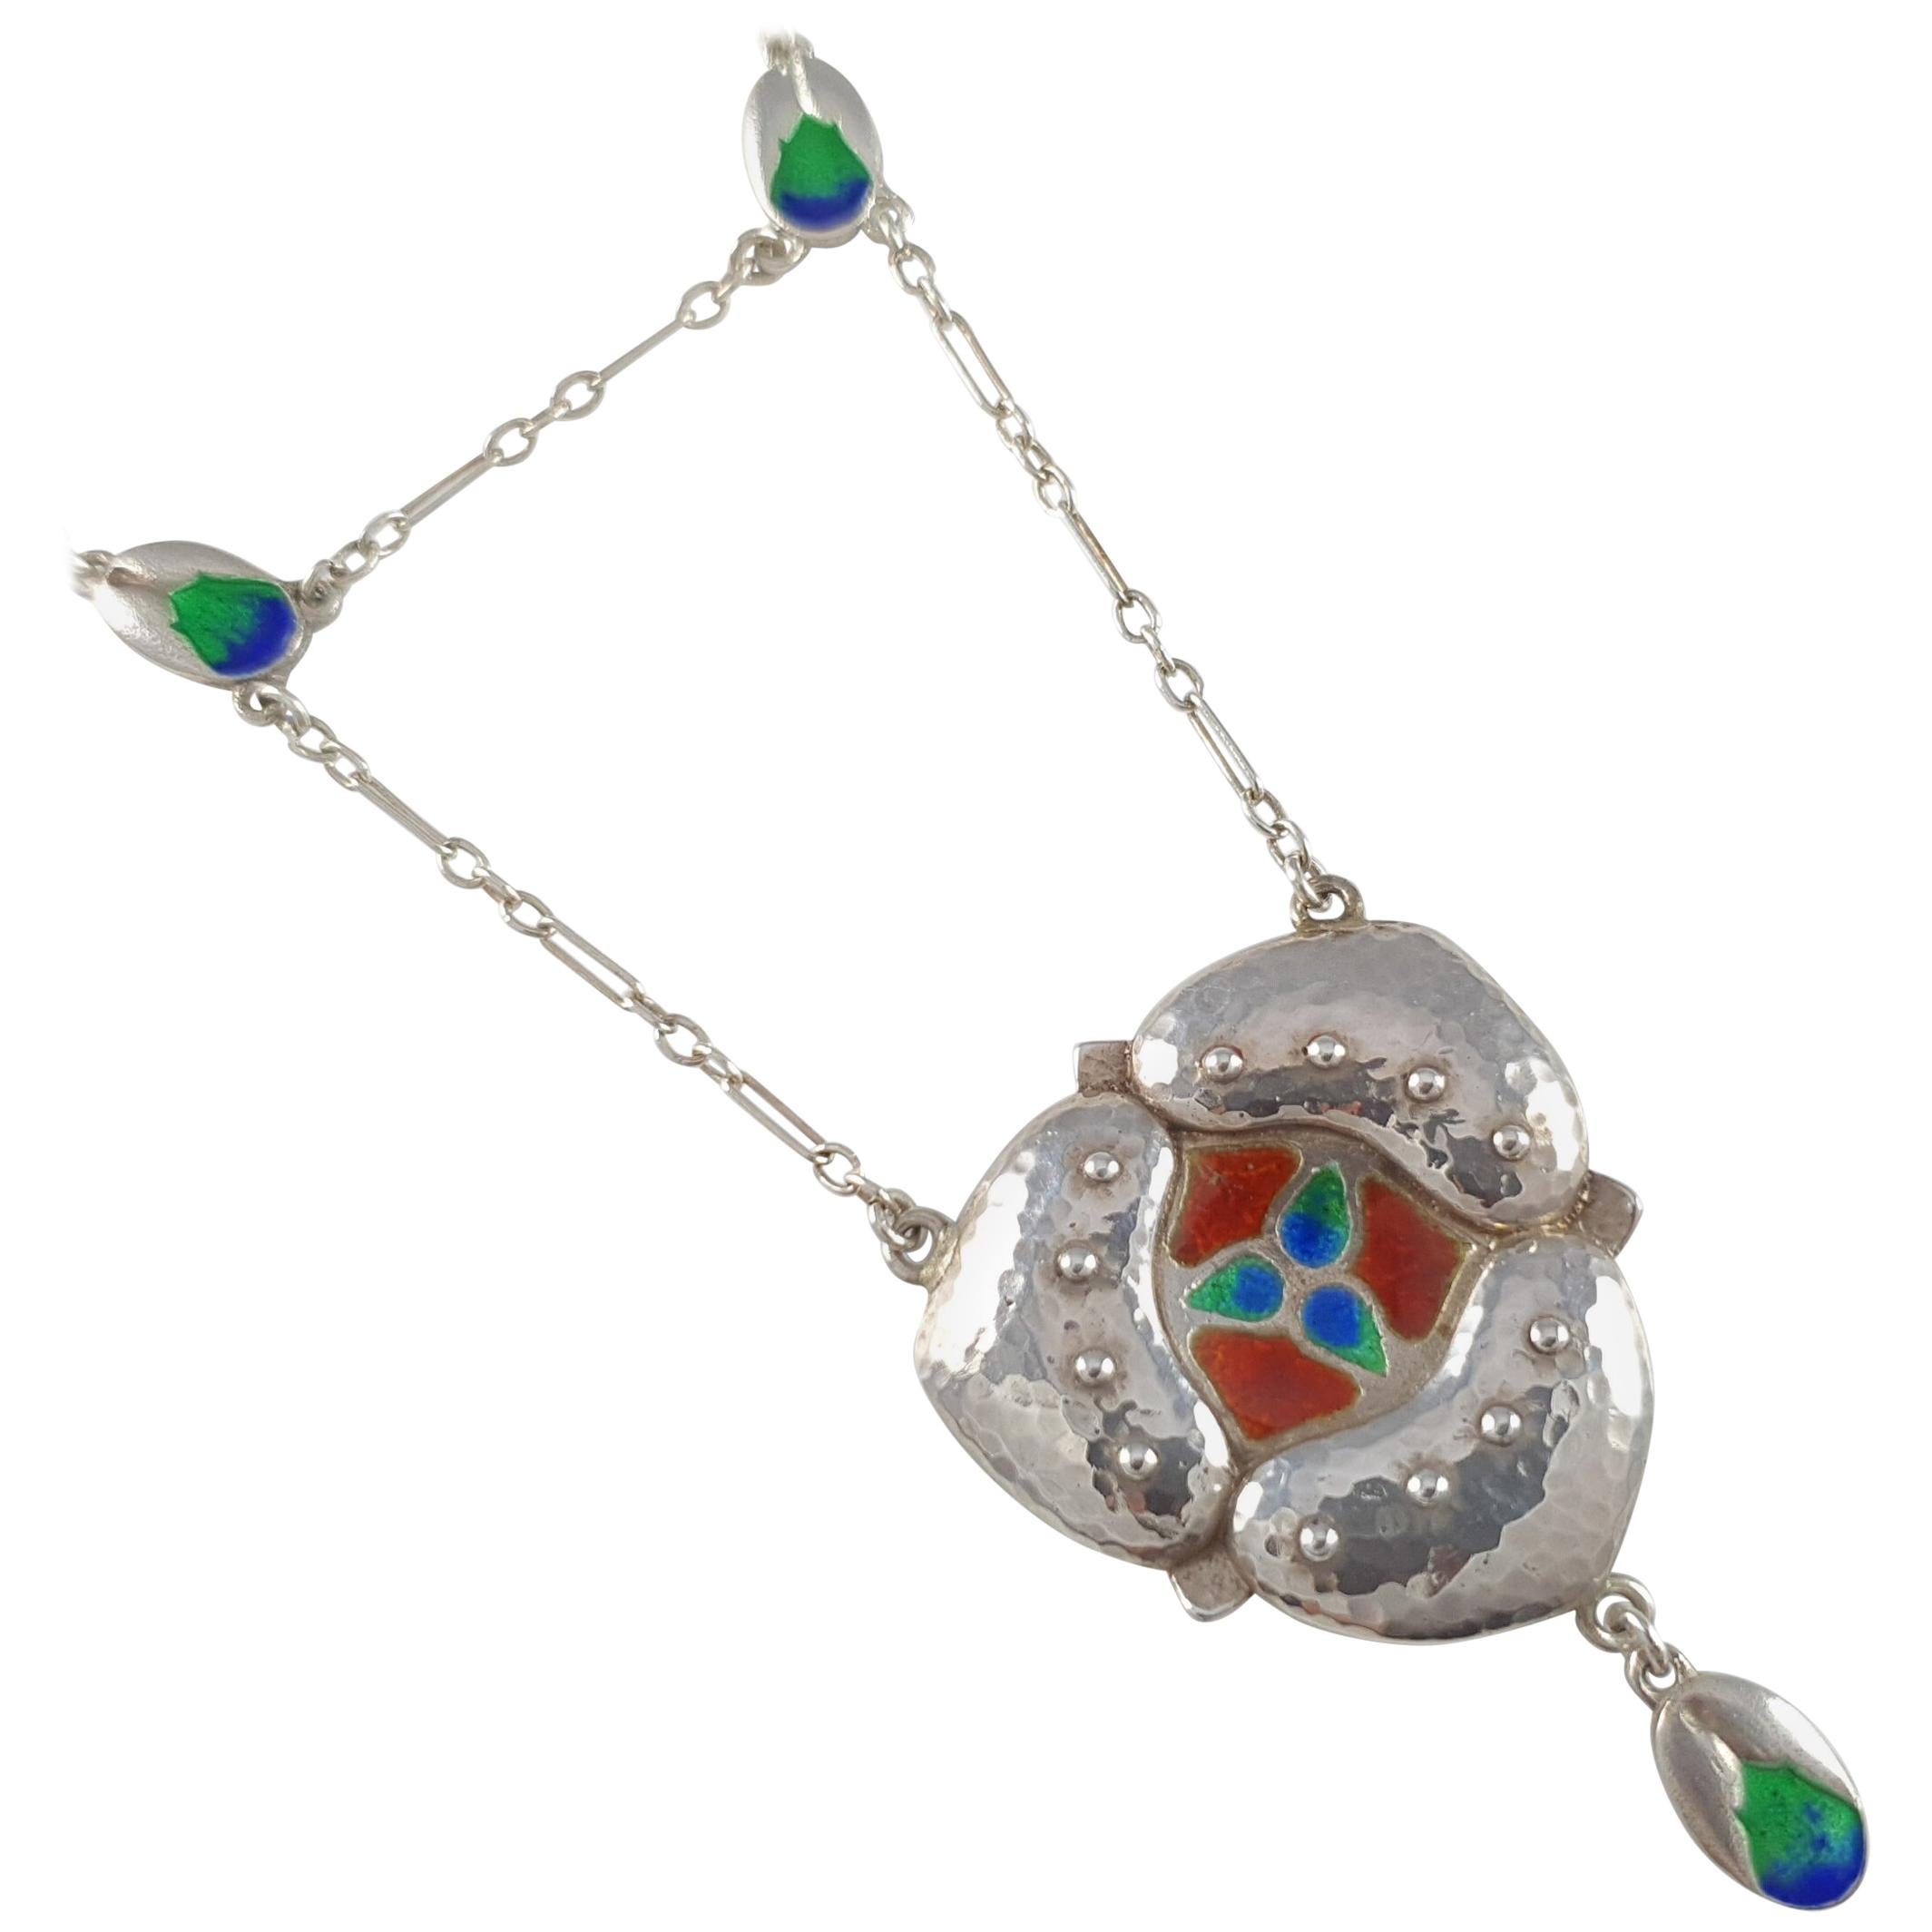 Murrle Bennett & Co. Arts & Crafts Silver and Enamel Pendant Necklace circa 1905